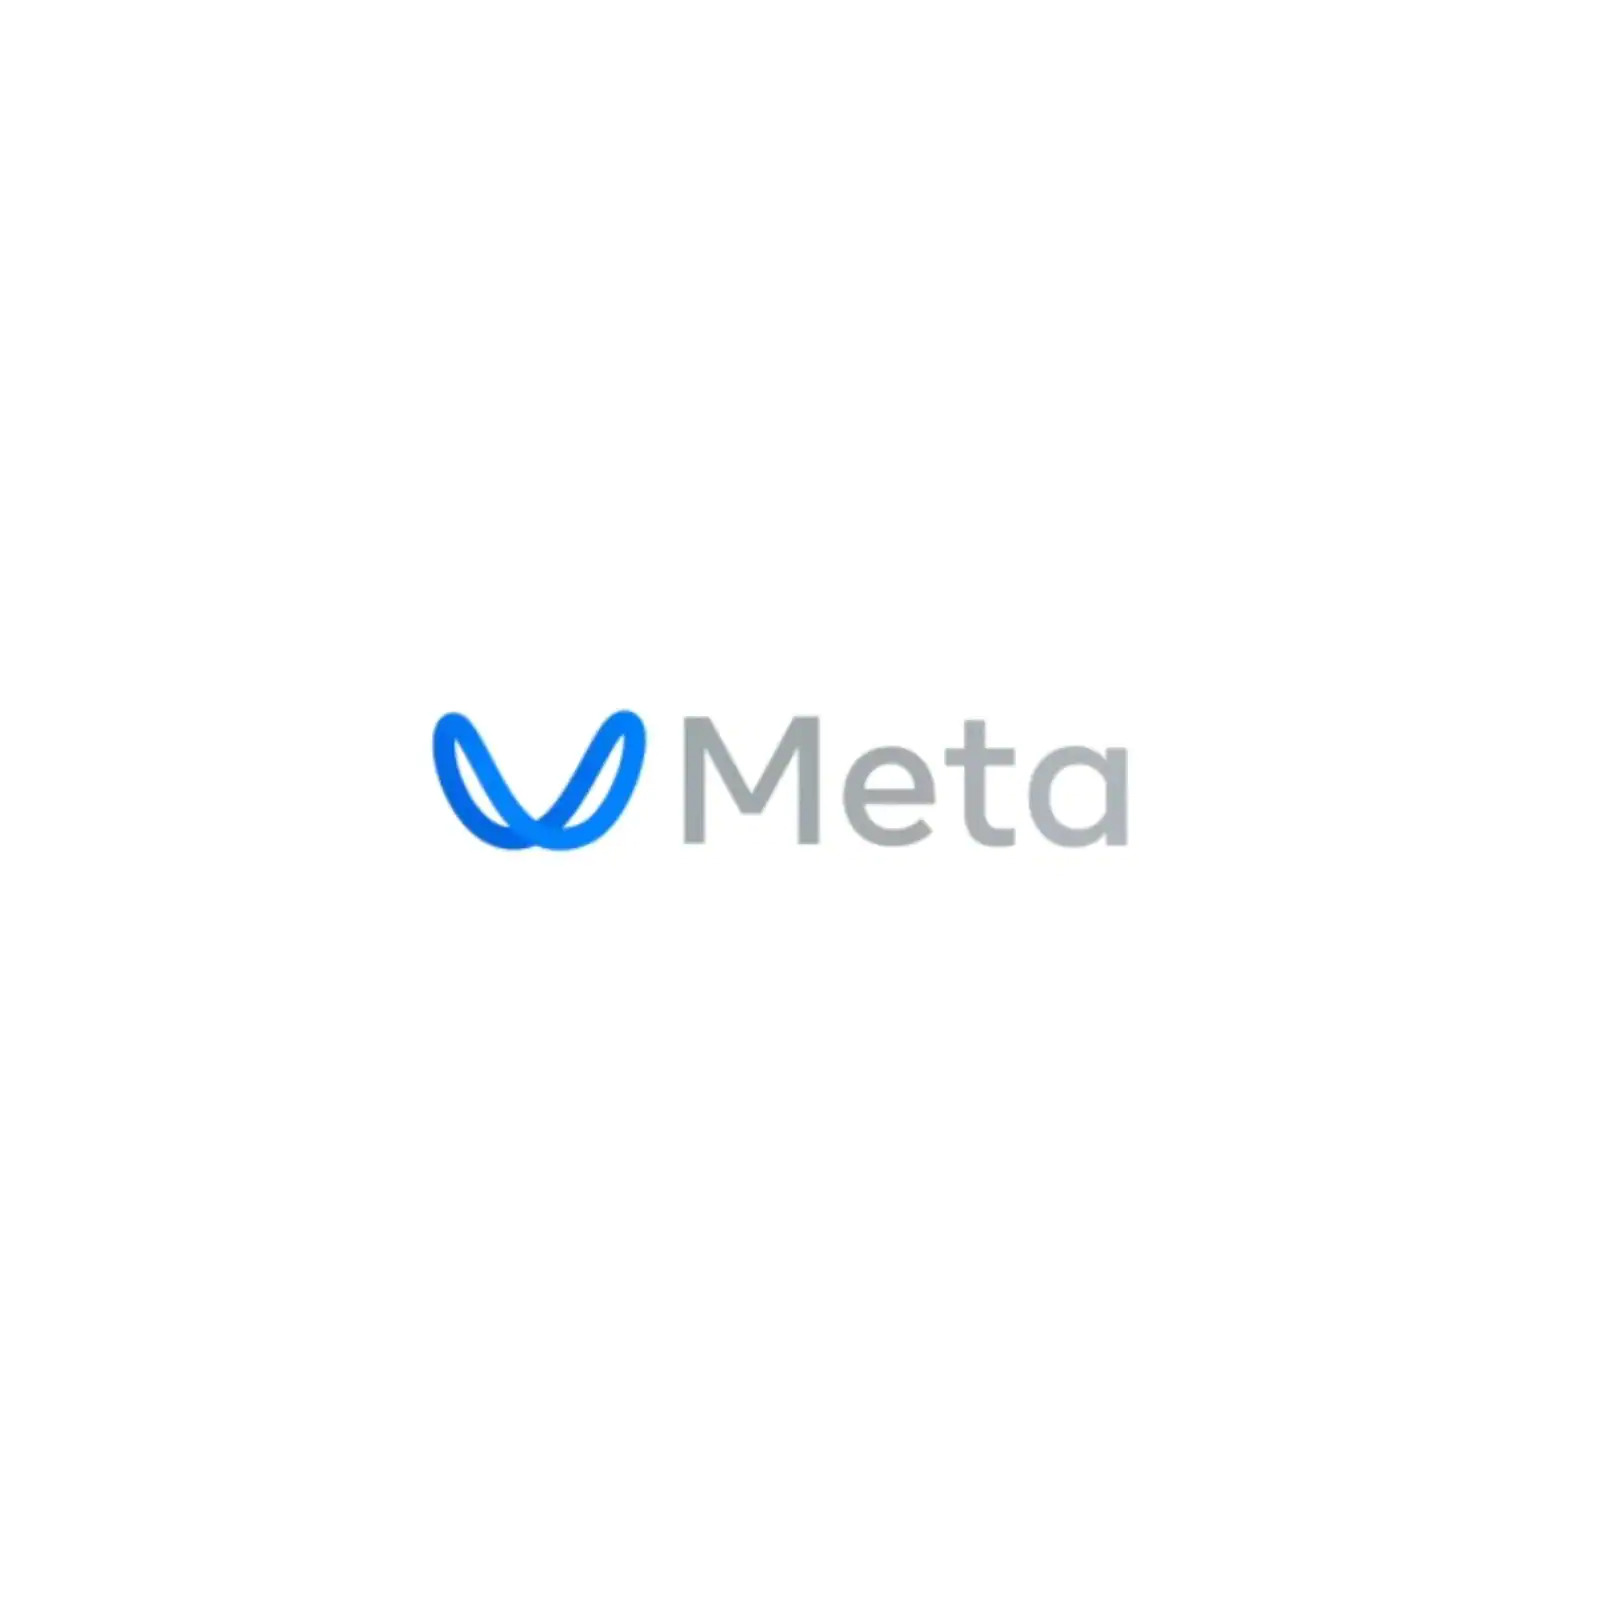 Facebook Changed Its Name To ‘Meta’. But Why Though?